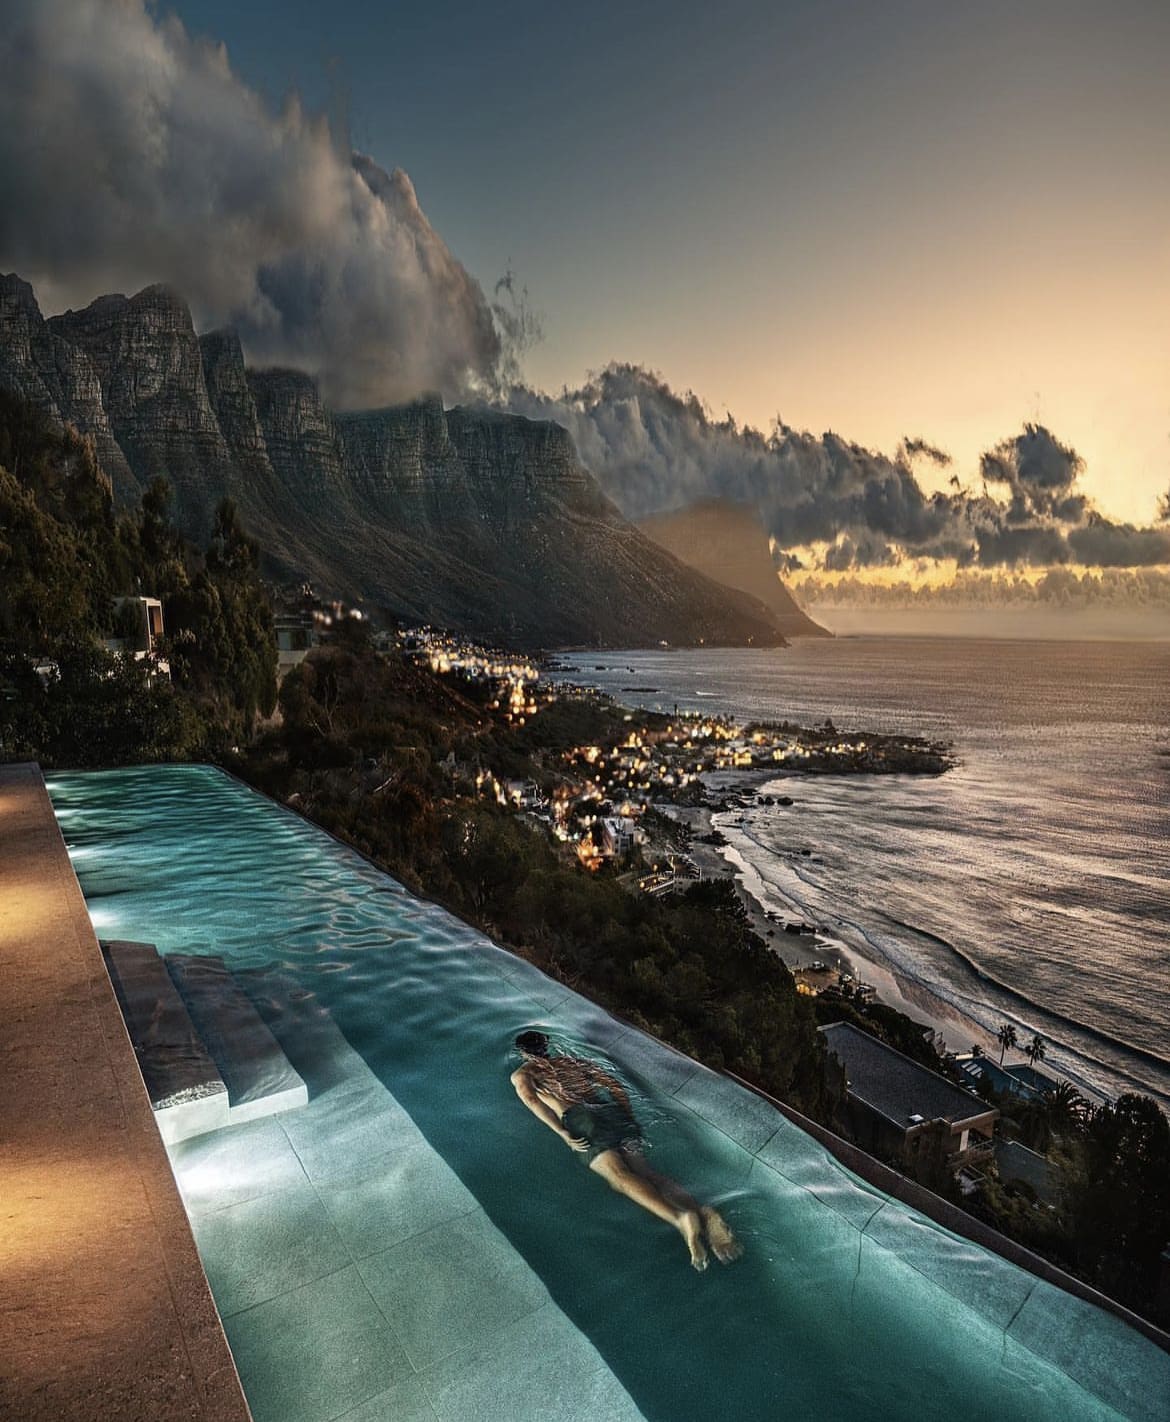 Cape Town, South Africa - Best Party Cities Around the World